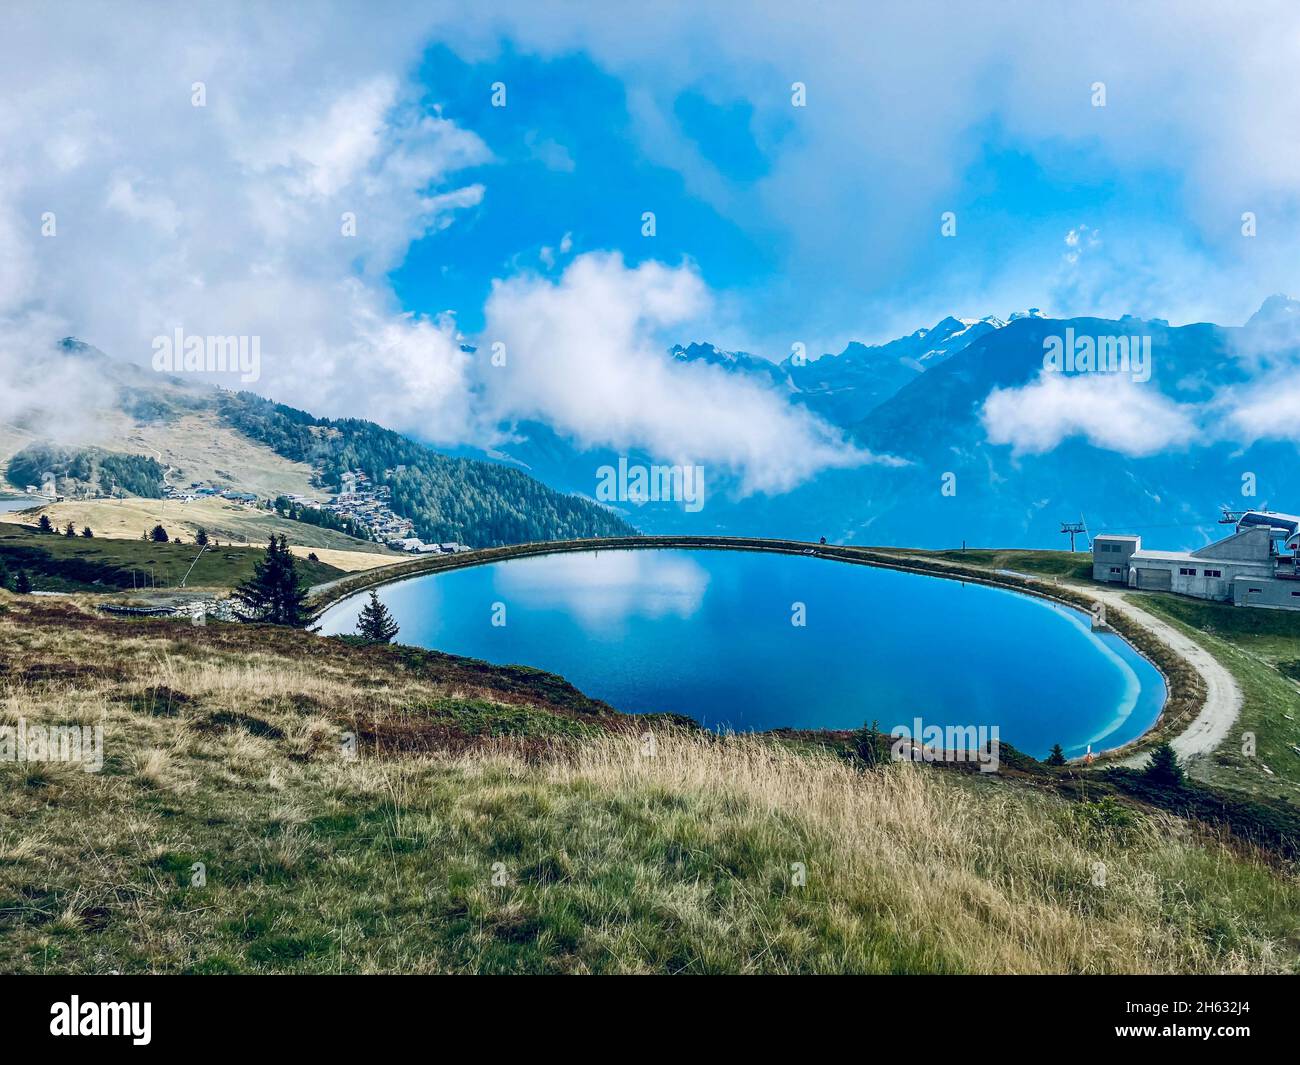 Lake in the Swiss Mountains in a cloudy scenery Stock Photo